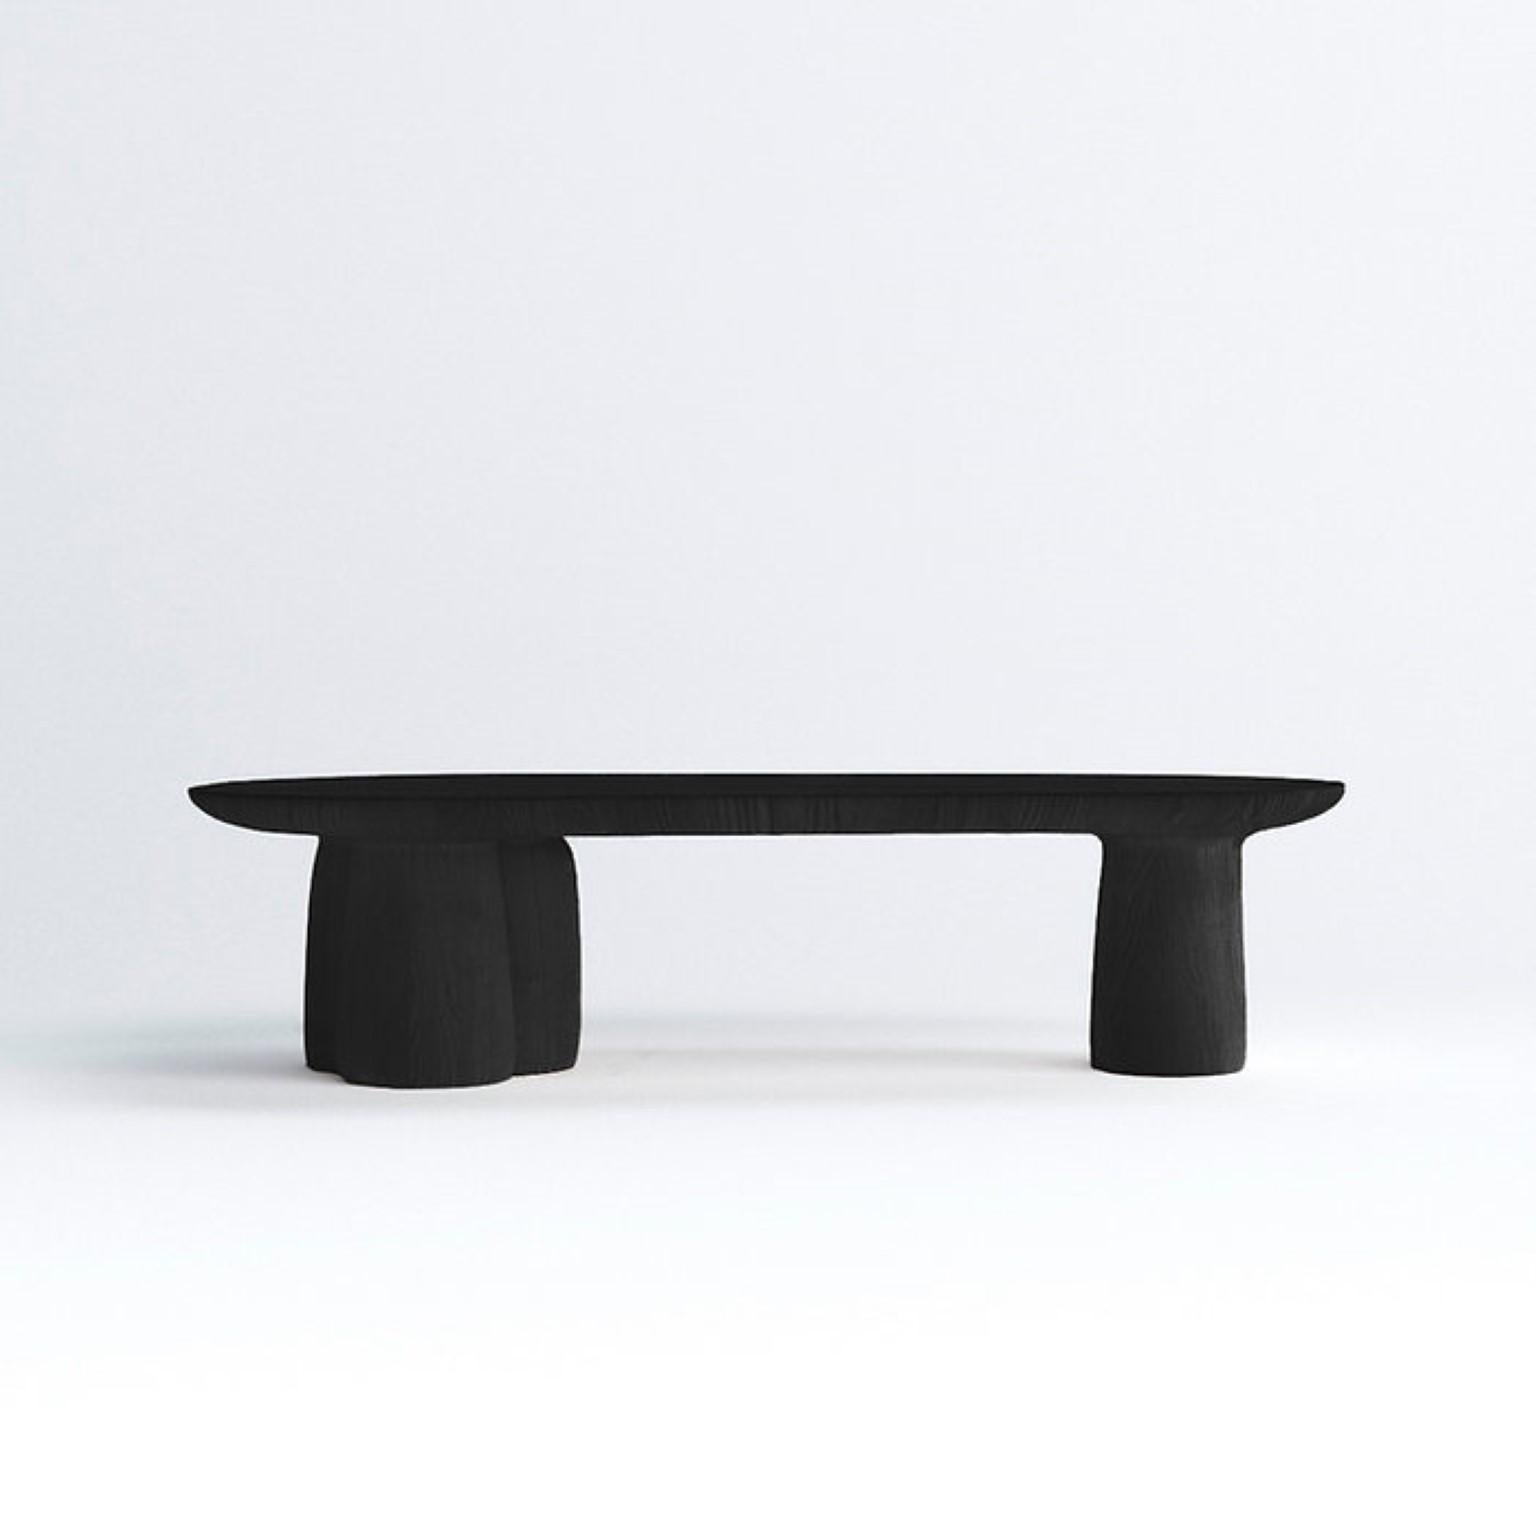 Long black coffee table by Faina
Design: Victoriya Yakusha
Materials: Ash in natural or black color
Dimensions: W 113 x D 47 x H 29 cm

Like strong sunflower stems, SONIAH tables are fed with energy from the ground, saturating with it the space